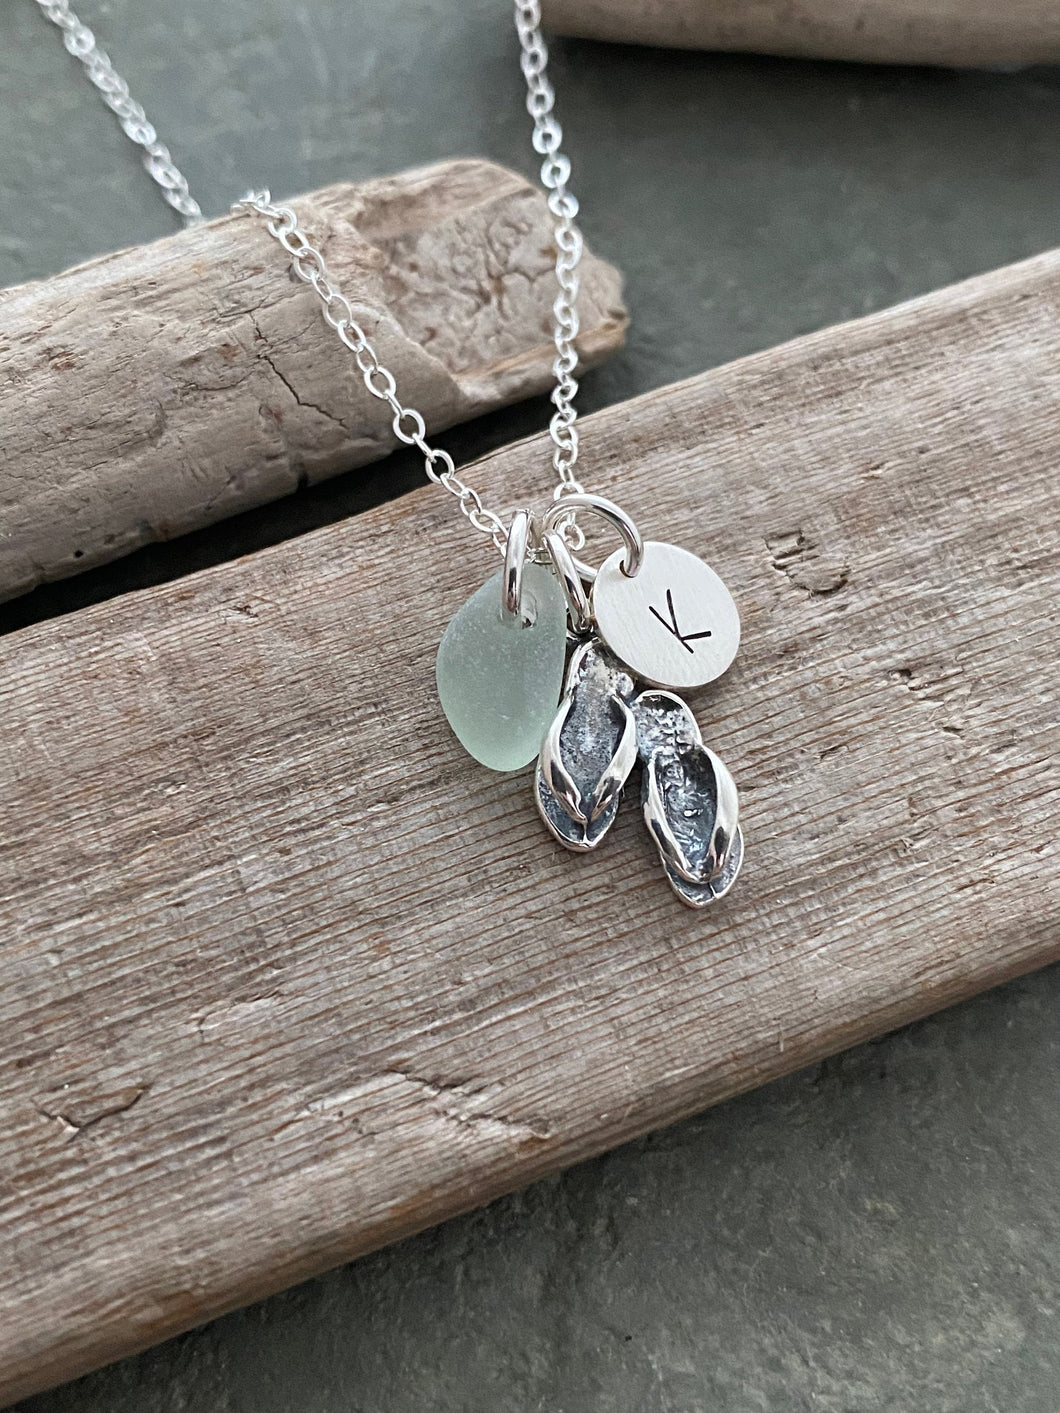 Sterling Silver Flip Flop Sandal Necklace with Sea Glass and Initial Charm, Personalized Beach Jewelry, Gift for her - summer necklace